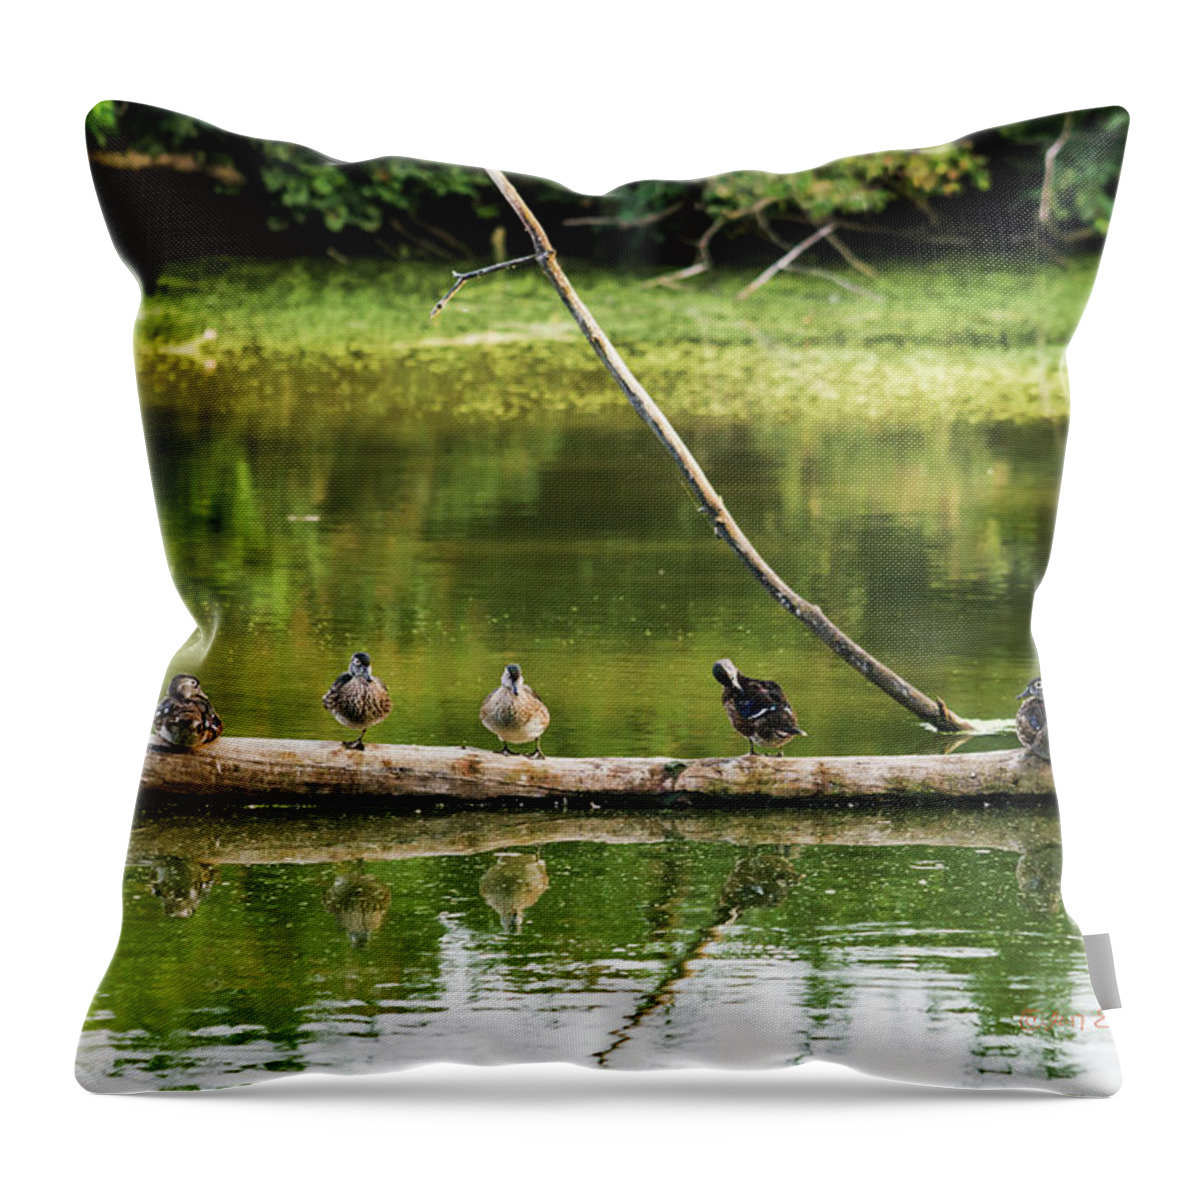 Heron Heaven Throw Pillow featuring the photograph New Wood Ducks On A Log by Ed Peterson